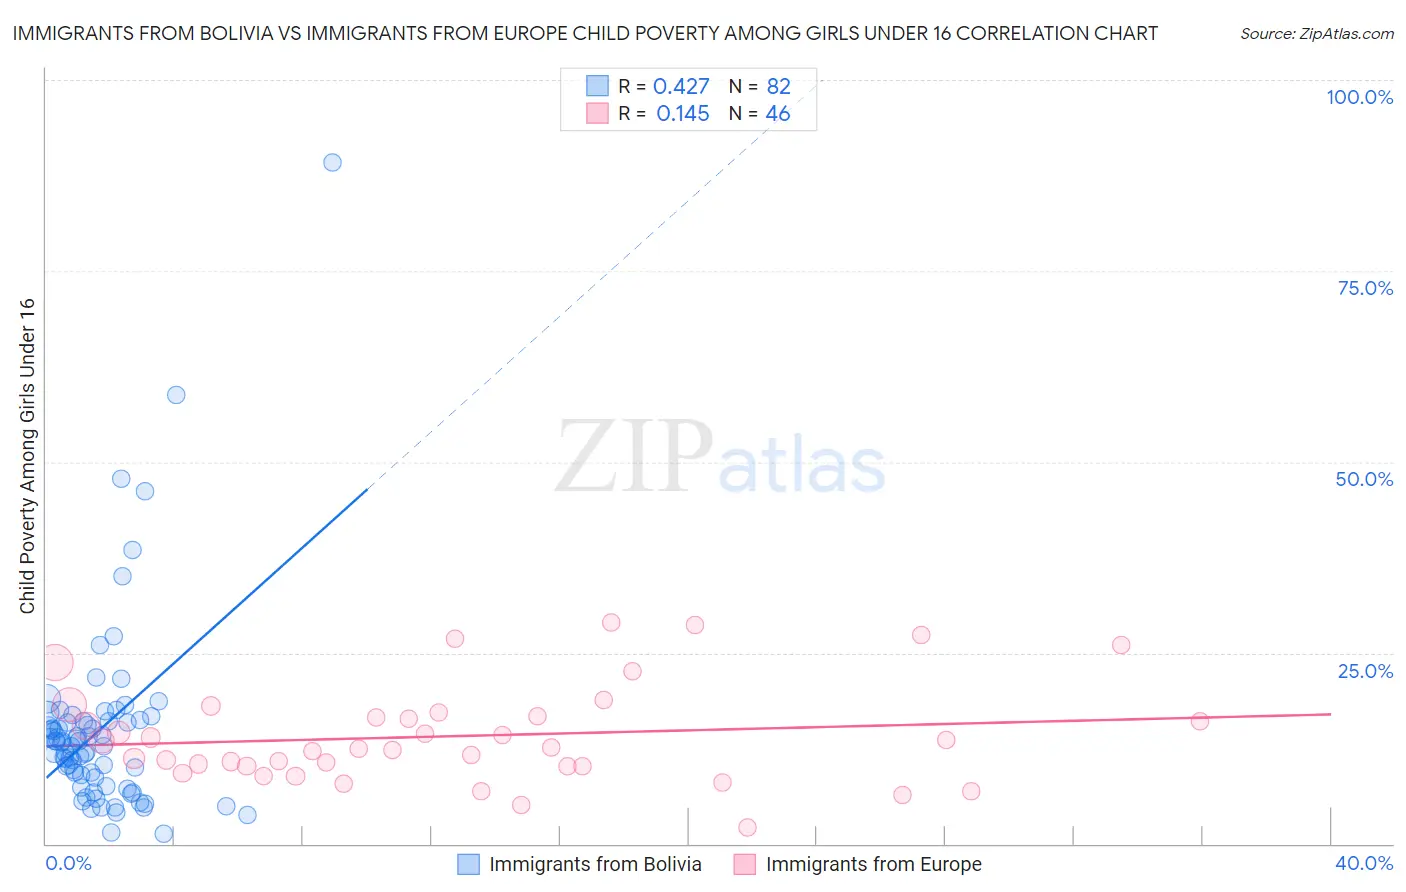 Immigrants from Bolivia vs Immigrants from Europe Child Poverty Among Girls Under 16